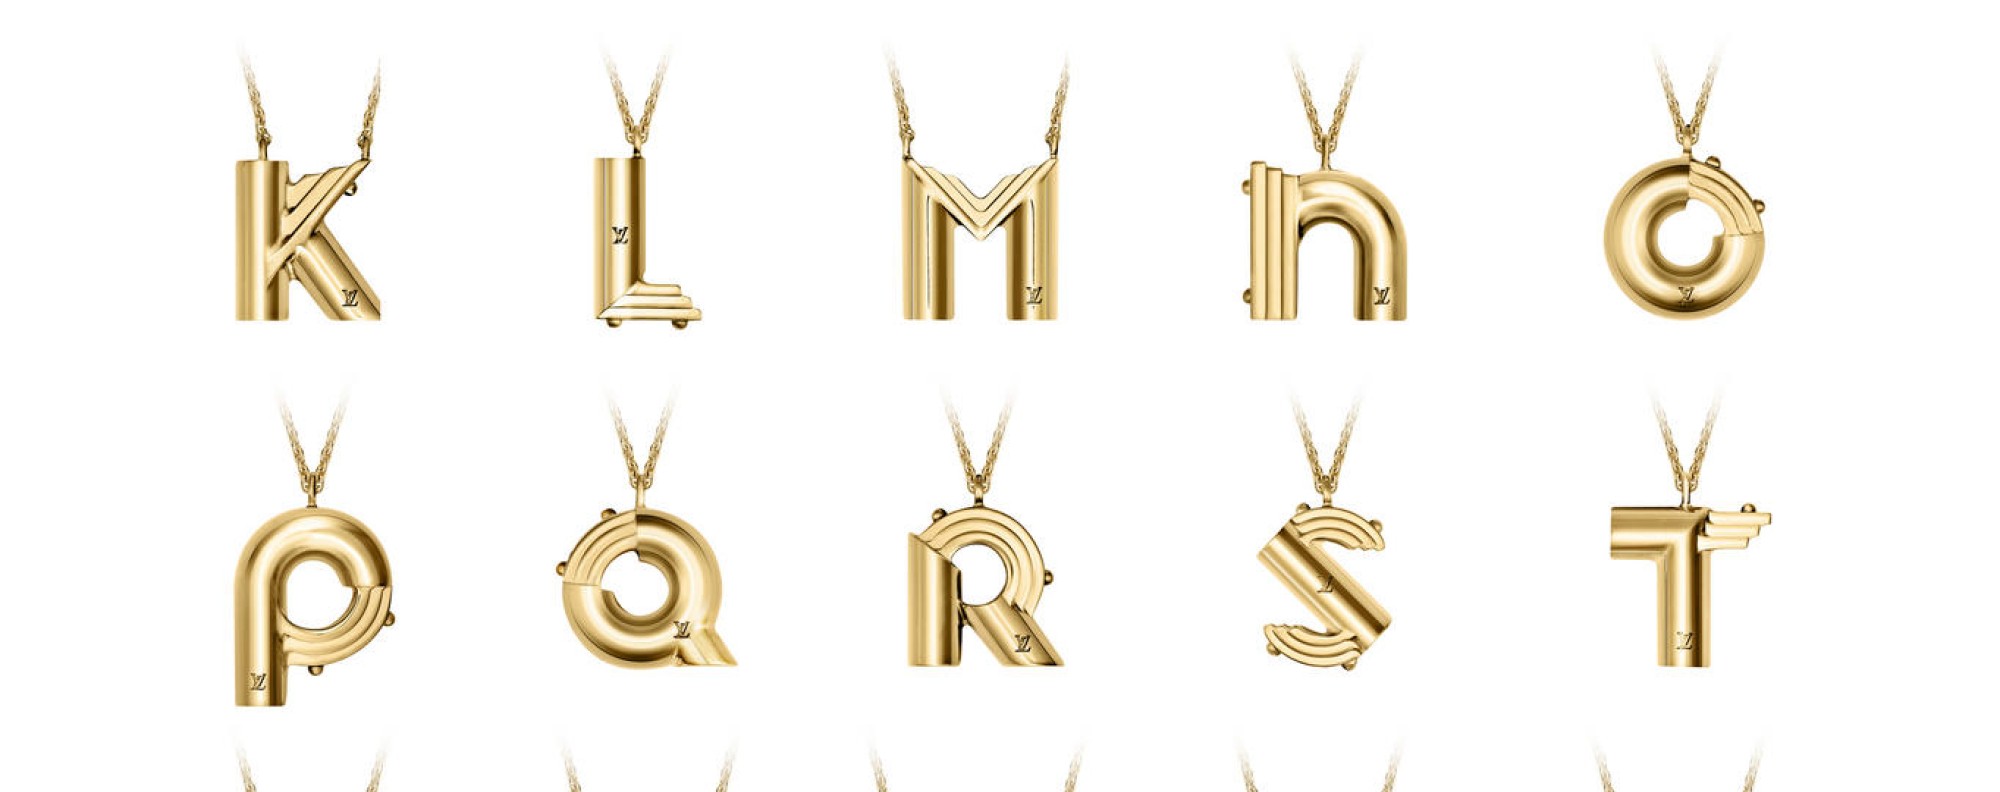 Learning the Louis Vuitton alphabet